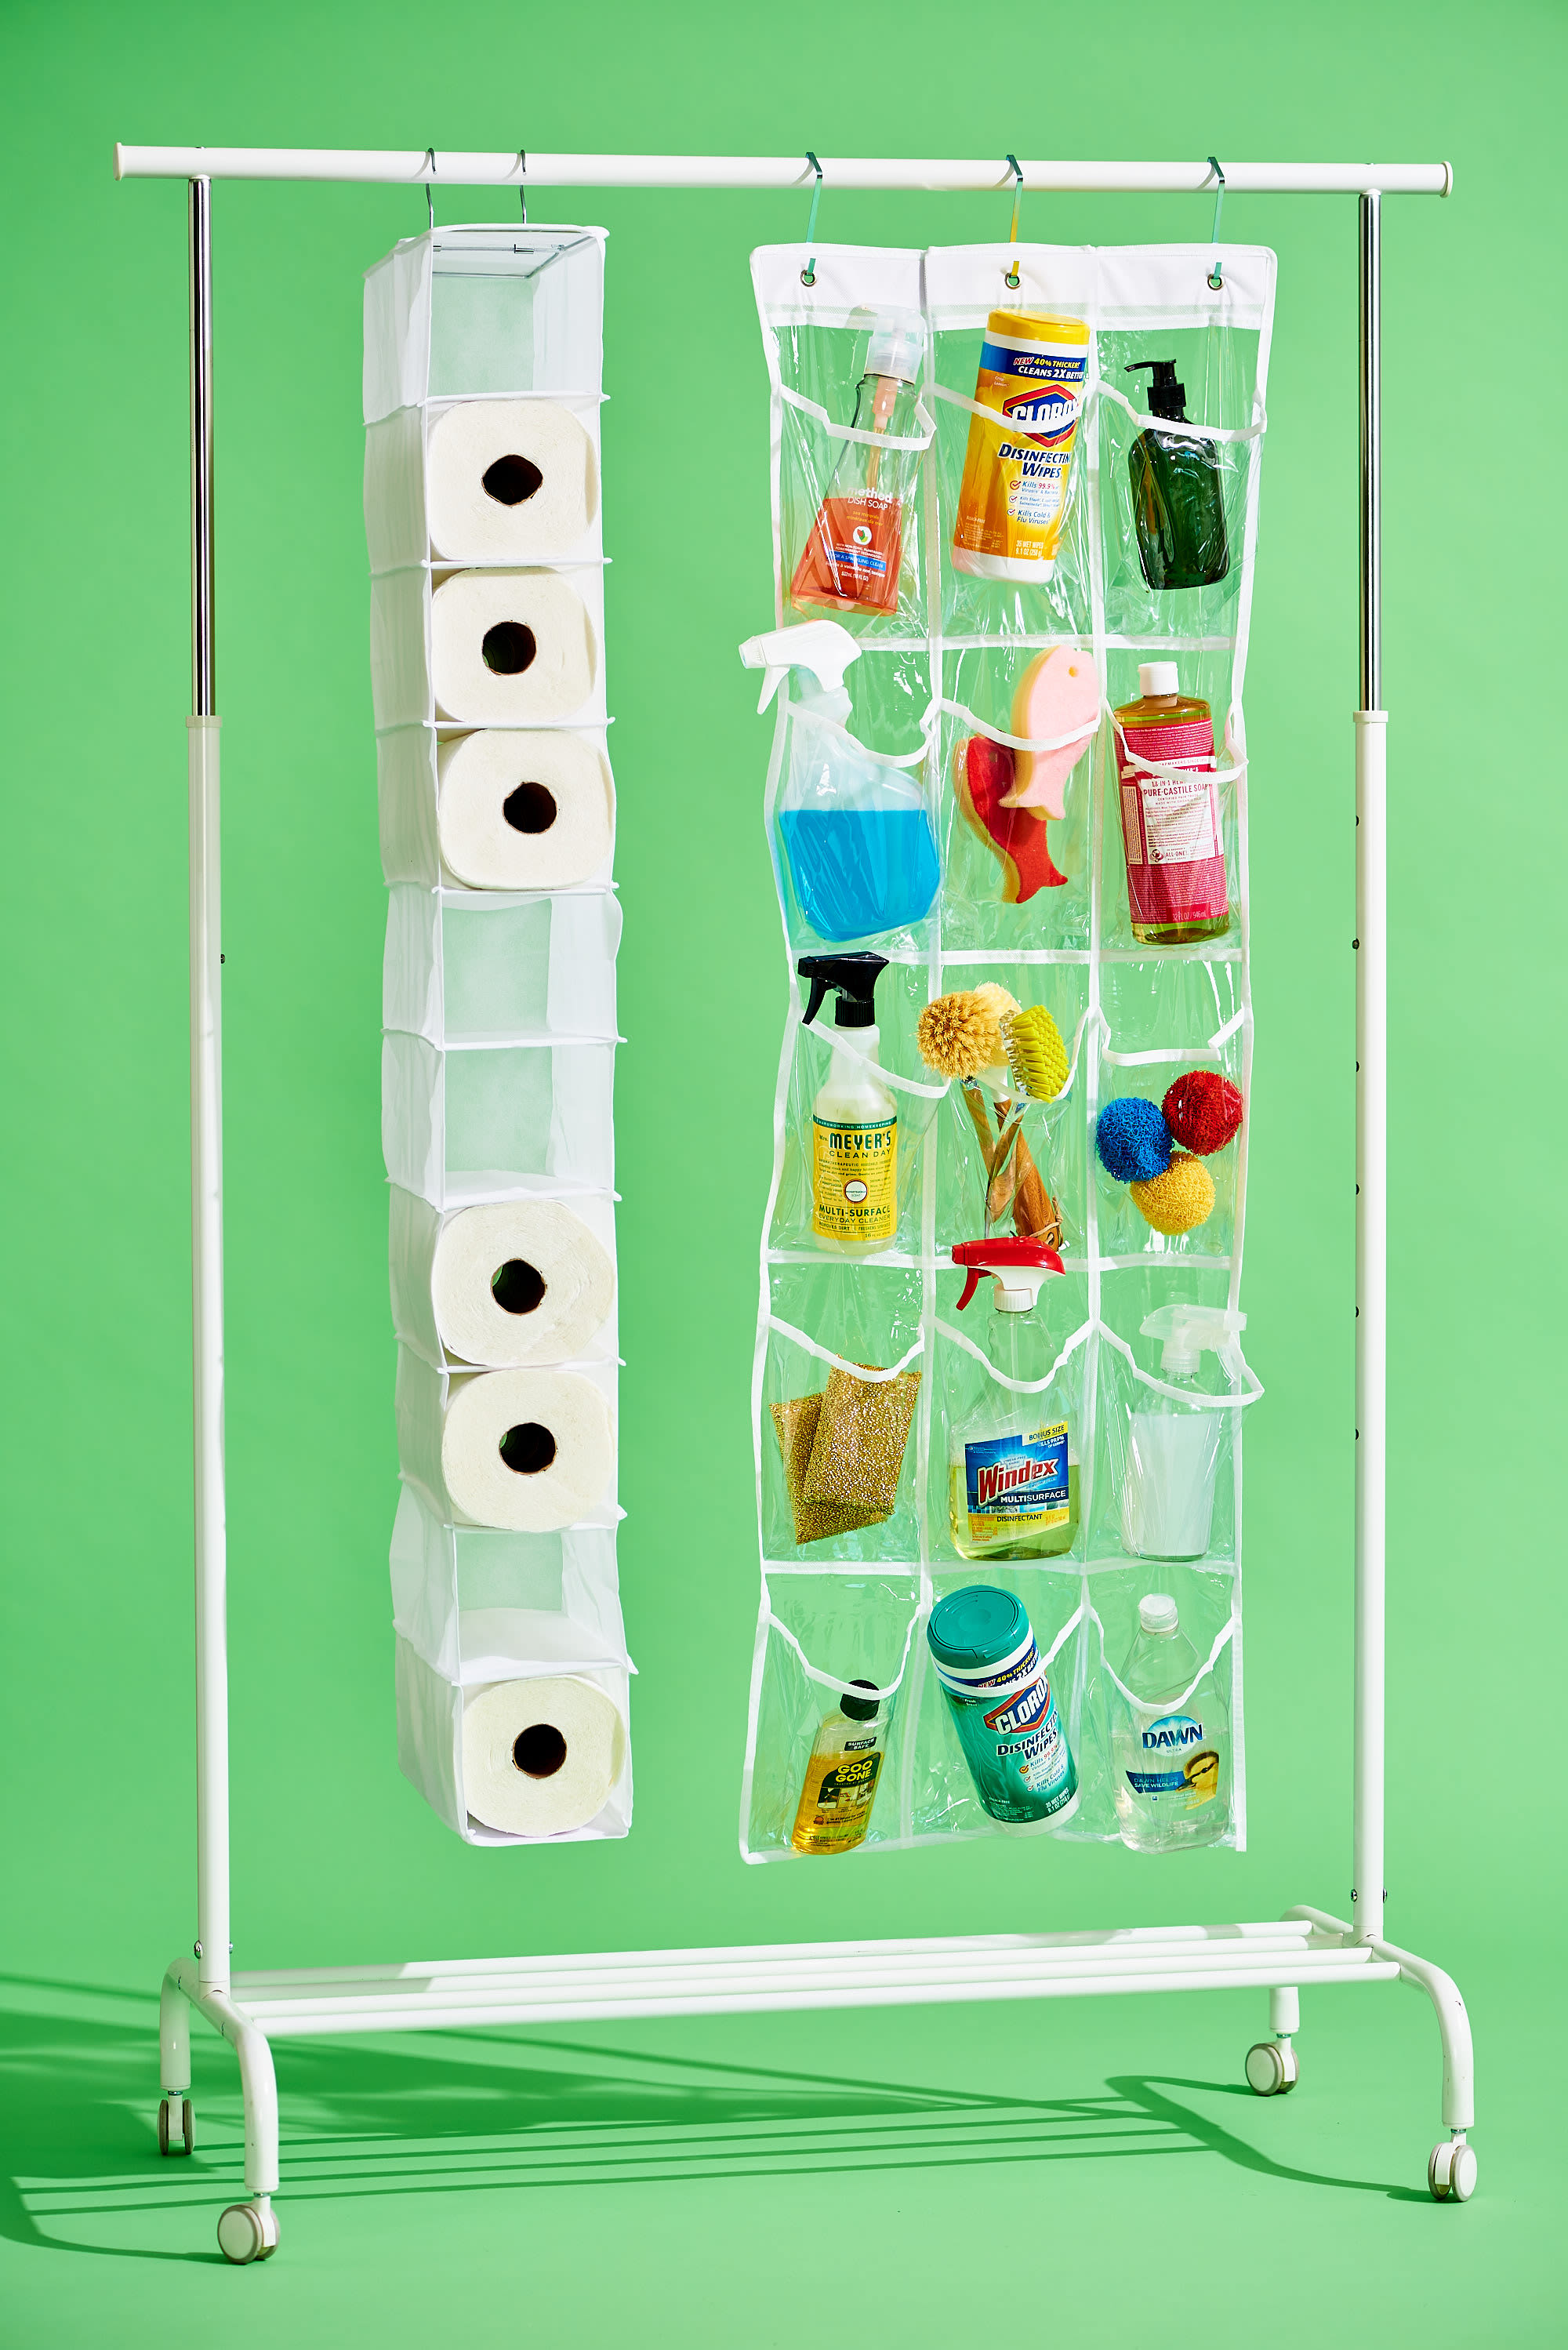 Repurpose an Over-the-Door Shoe Holder into a Cleaning Products Organizer